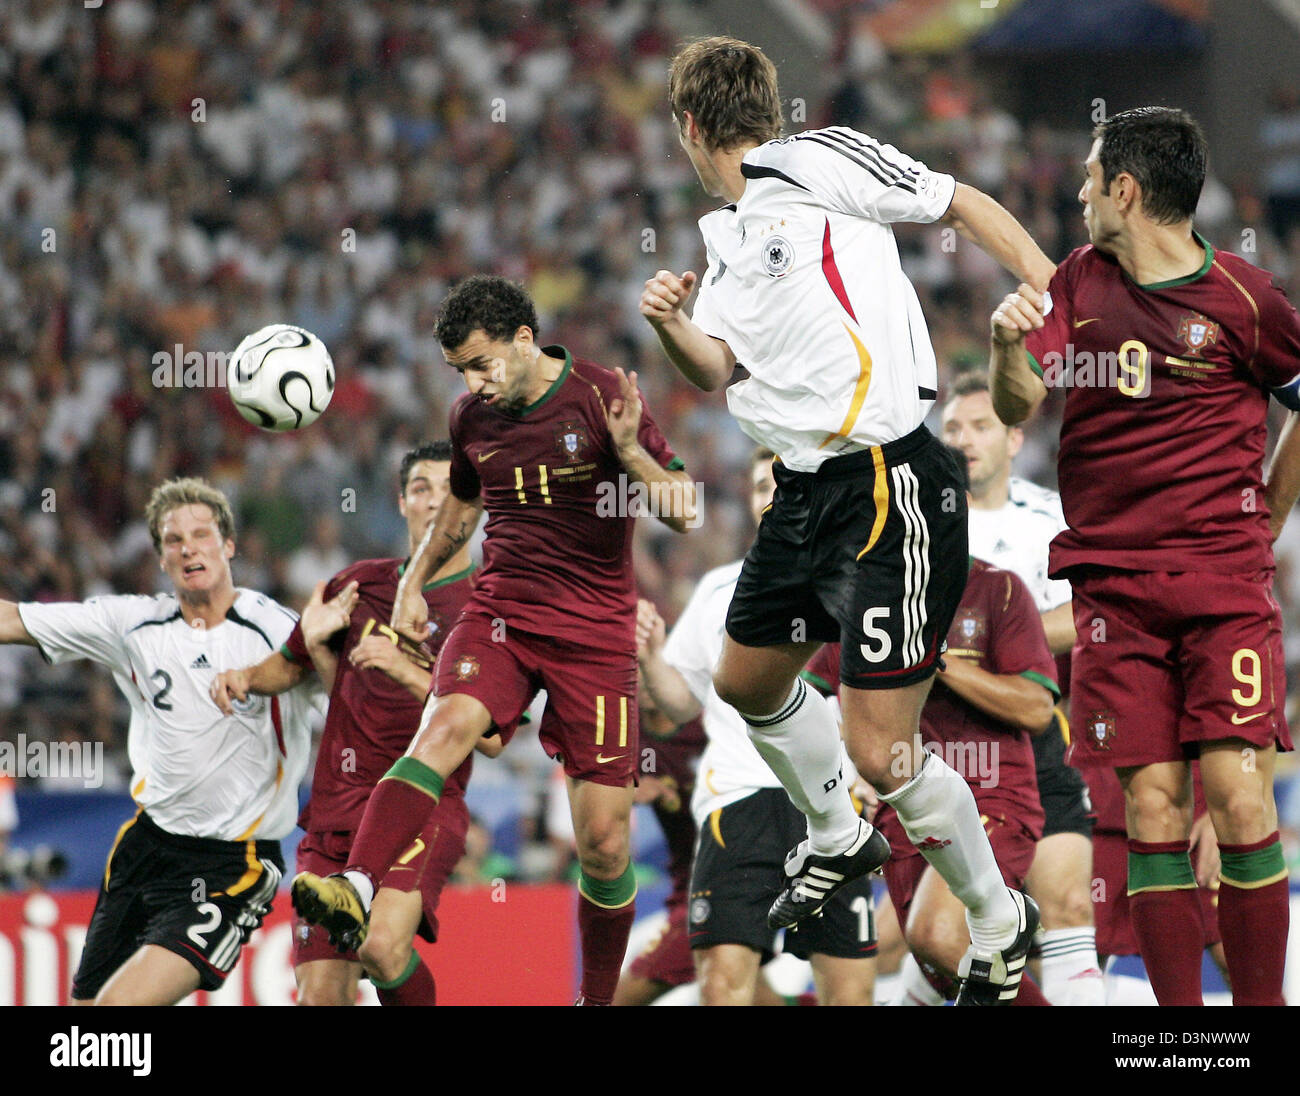 Sebastian Kehl (2-R) of Germany vies for the ball with Simao Sabrosa (2-L) of Portugal during the 3rd place match of the 2006 FIFA World Cup Germany vs. Portugal in Stuttgart, Germany, Saturday 08 July 2006. Pauleta of Portugal is seen on the right. Photo: RONALD WITTEK +++ Mobile Services OUT +++ Please refer to FIFA's terms and conditions Stock Photo